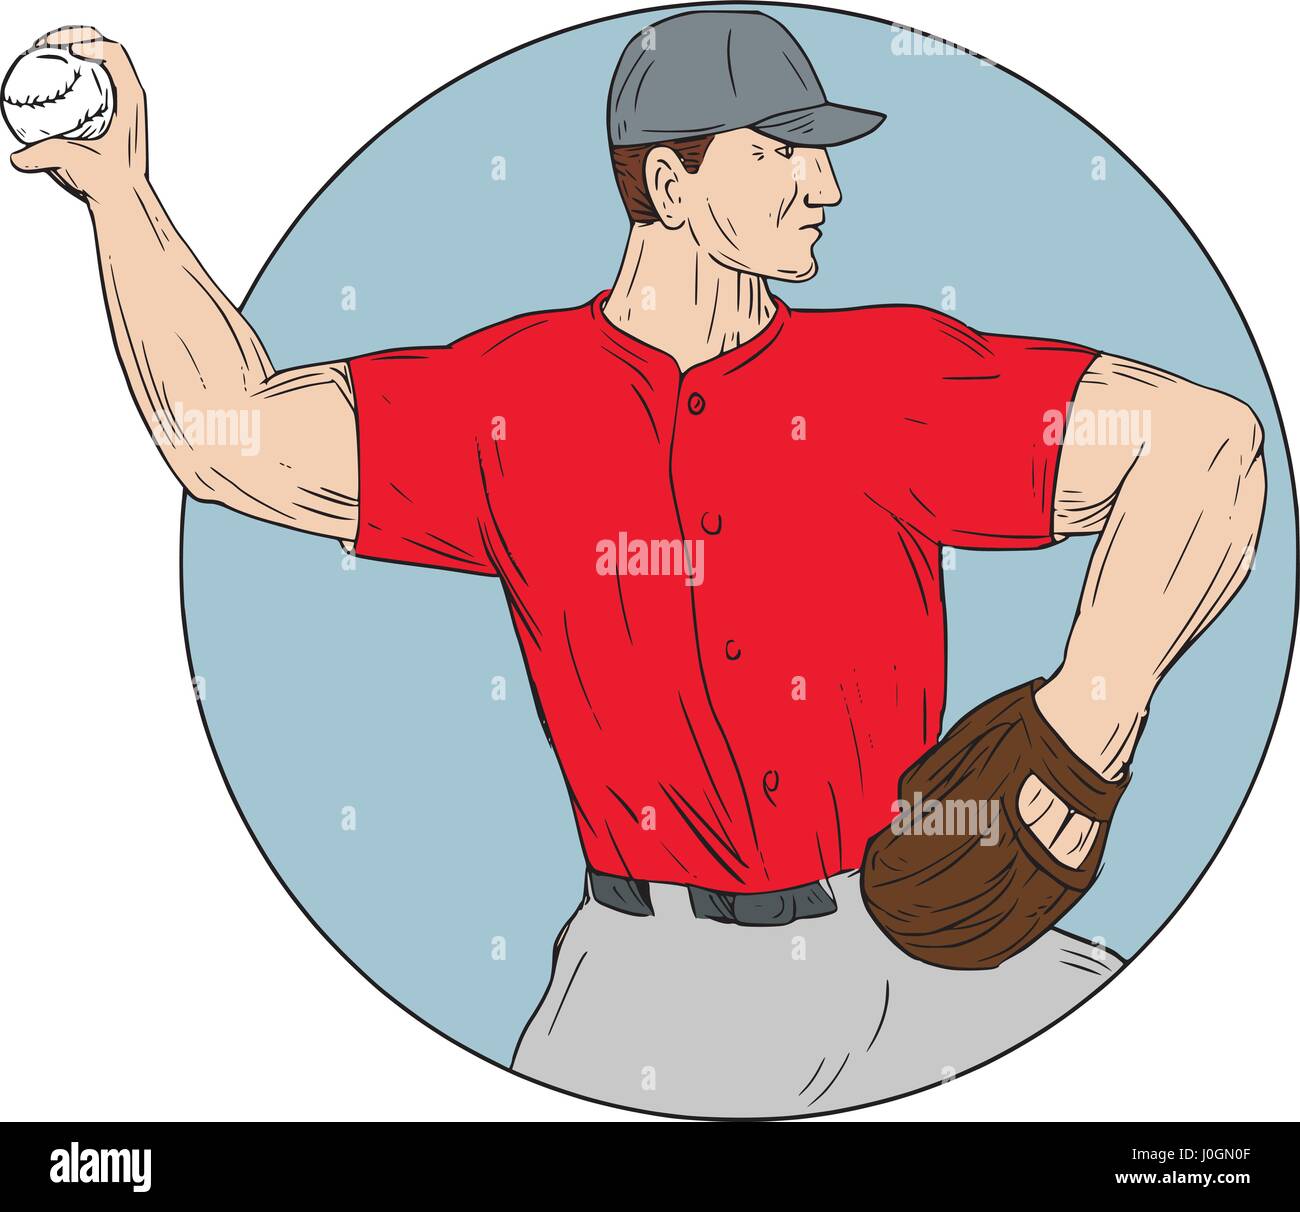 Drawing sketch style illustration of an american baseball player pitcher outfilelder throwing ball viewed from the side set inside circle on isolated Stock Vector